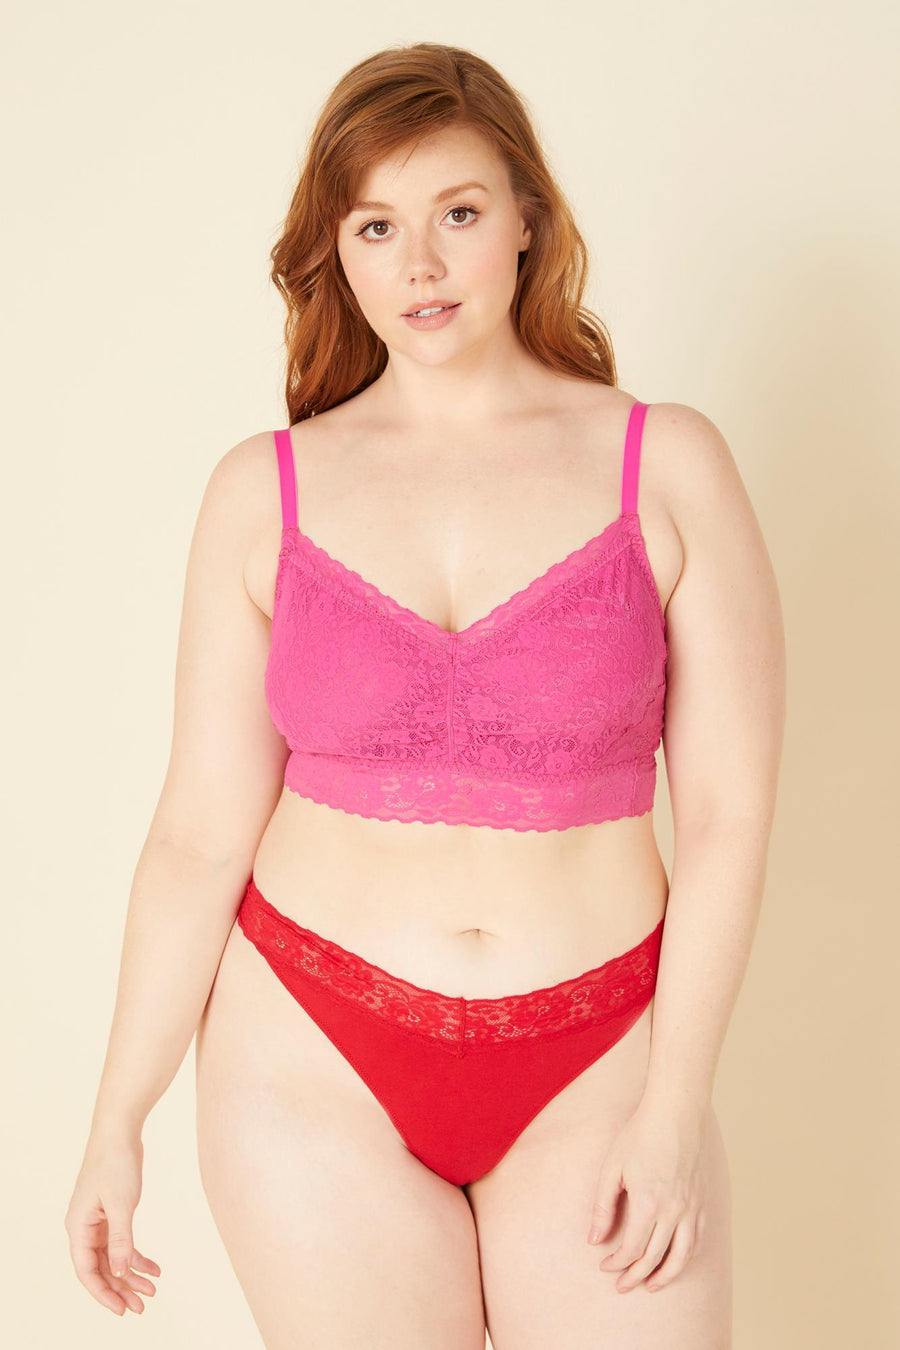 Rouge String - Cosabella Amore Adore String Ficelle Taille Basse Grande Taill